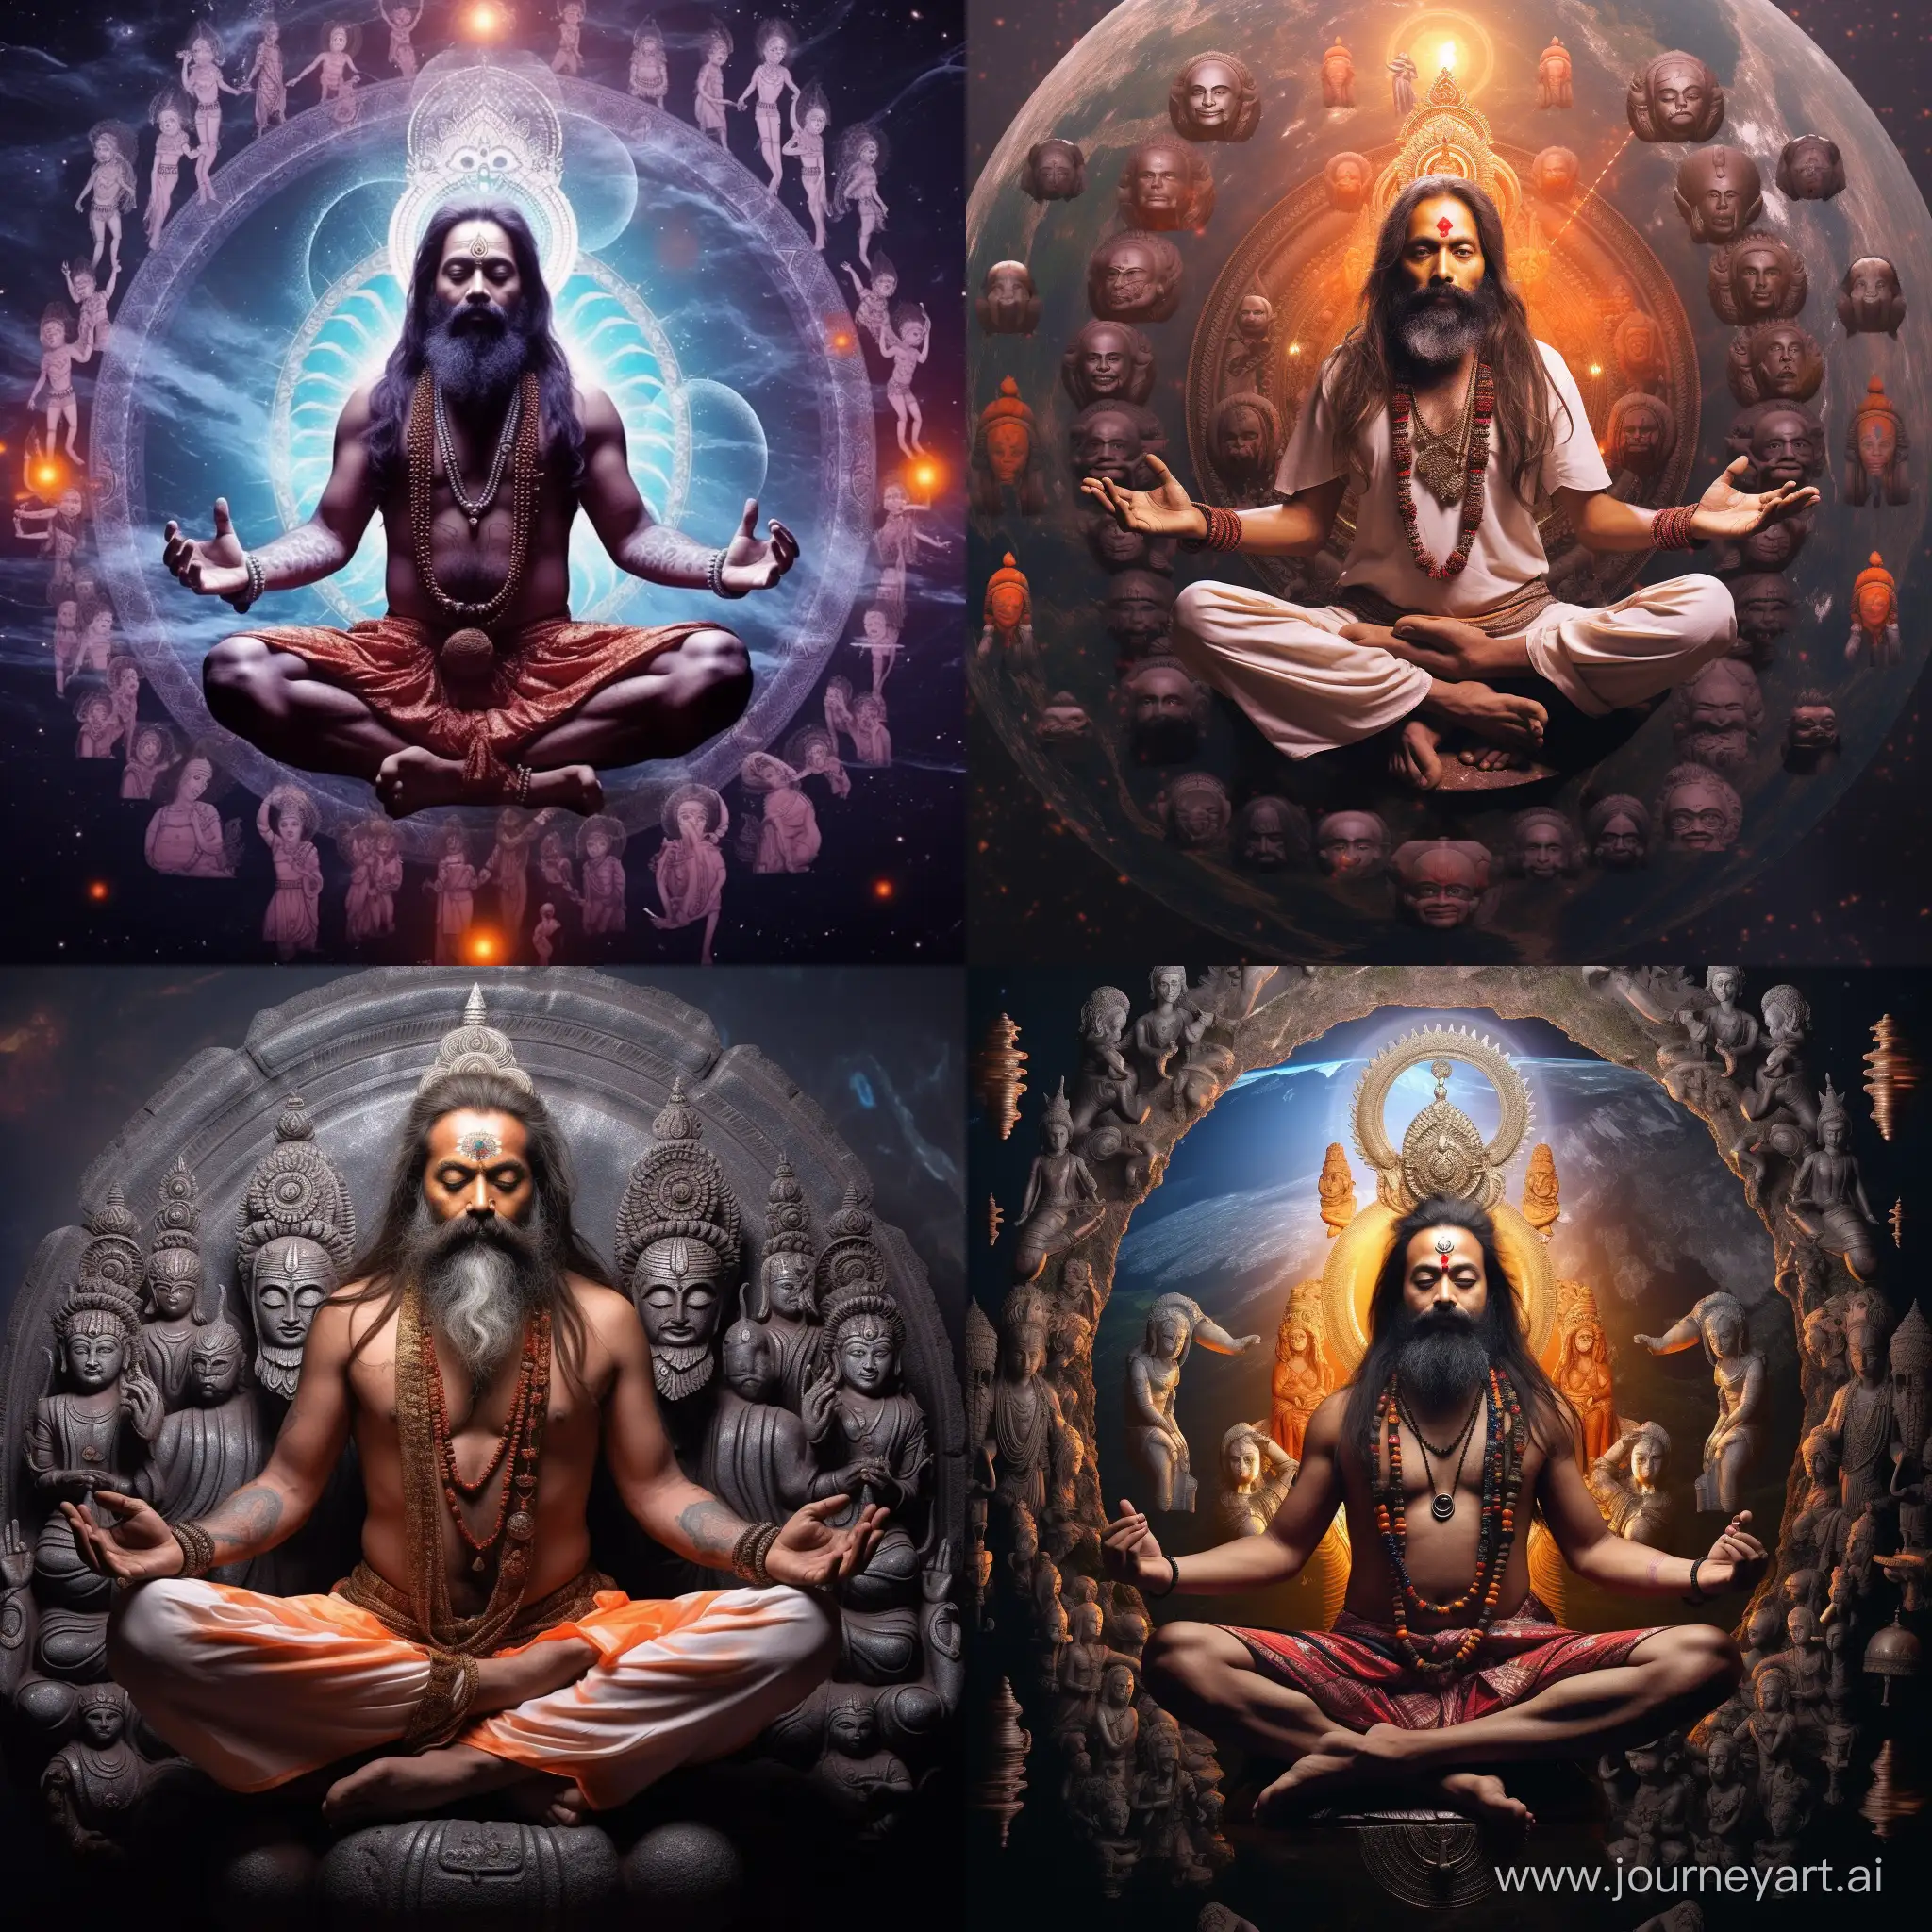 Mystical-Depiction-of-Shiva-in-Cosmic-Meditation-with-Multiple-Heads-and-Planets